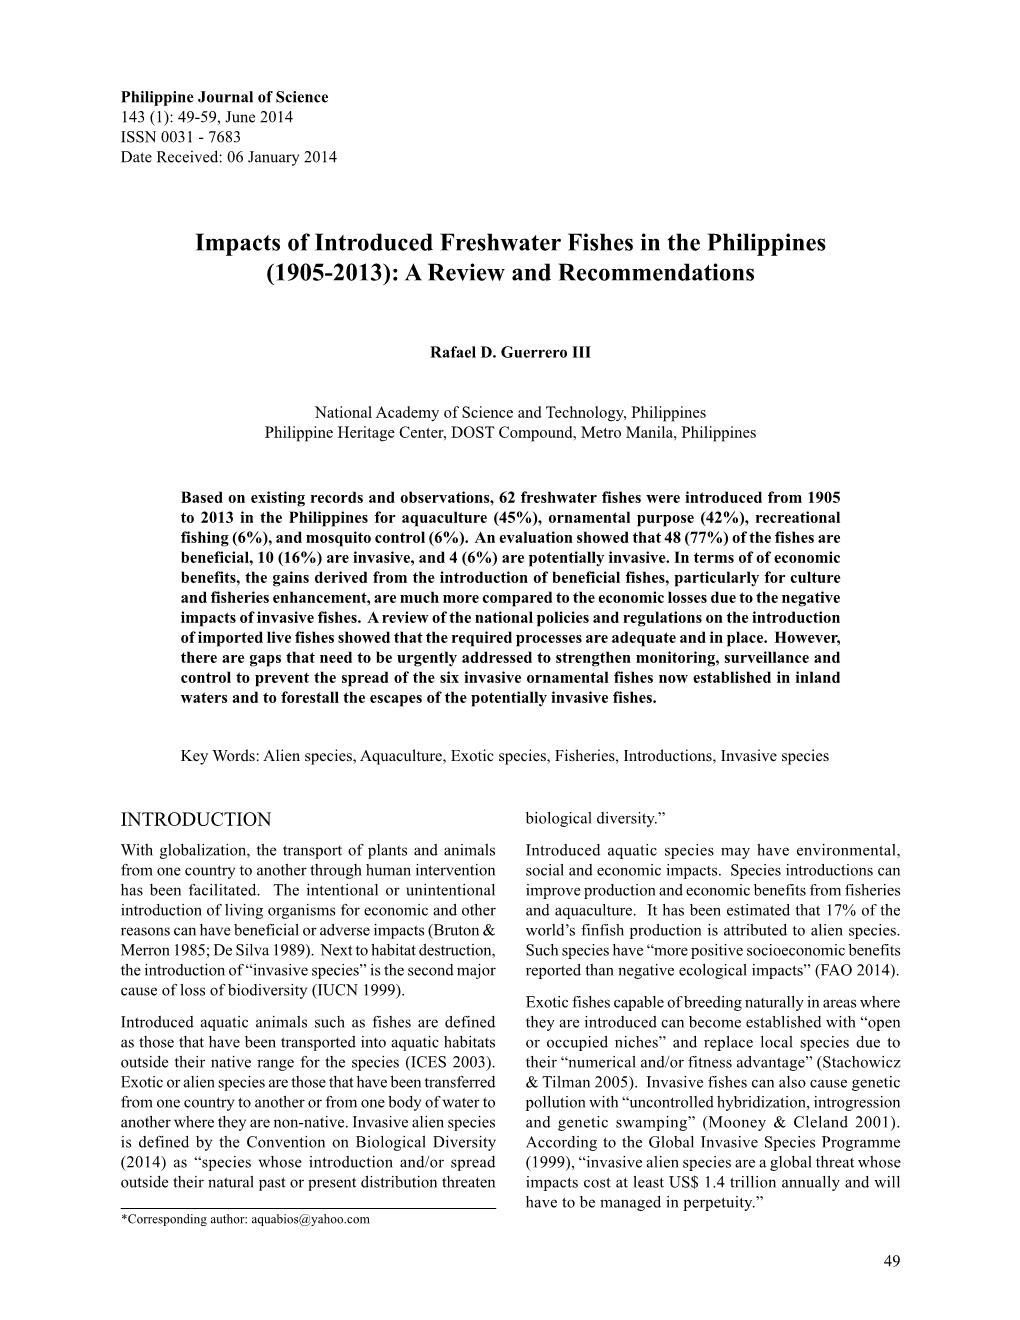 Impacts of Introduced Freshwater Fishes in the Philippines (1905-2013): a Review and Recommendations